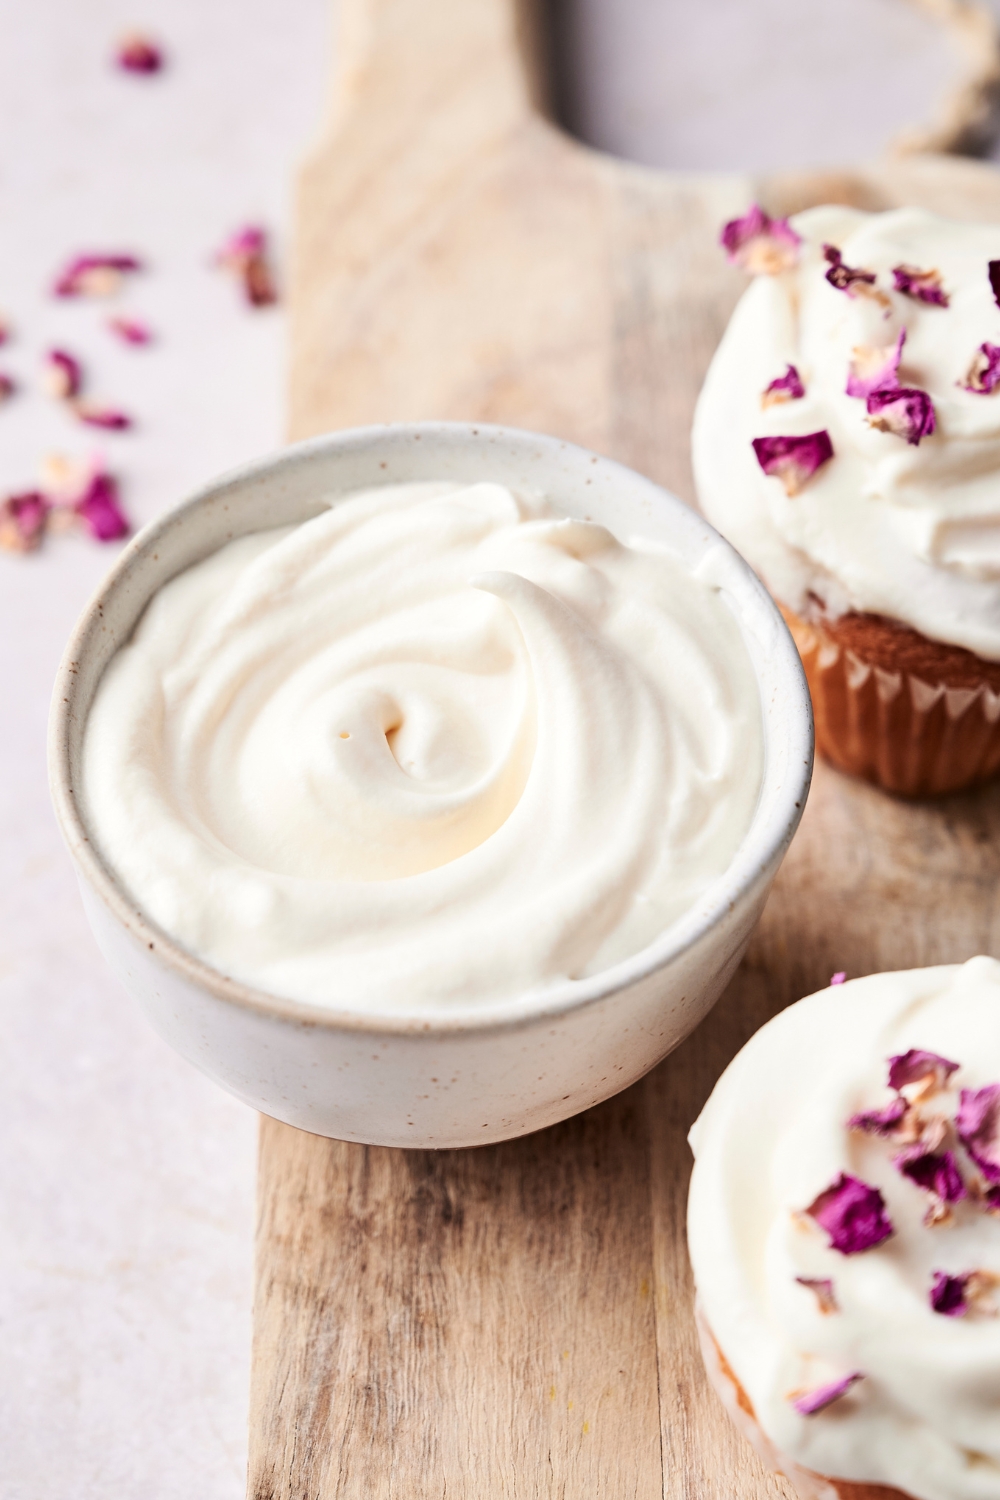 A small bowl with creme fraiche frosting sitting on a wooden board next to two cupcakes.